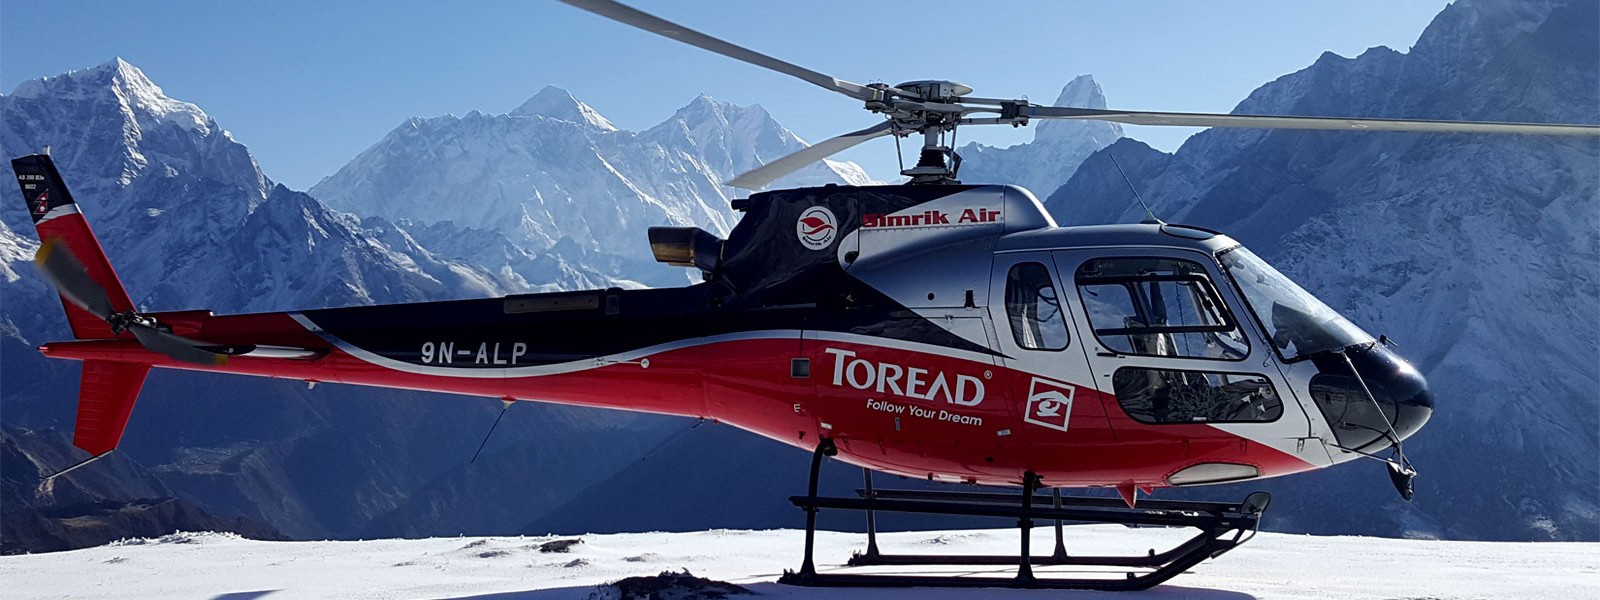 Everest Base Camp Helicopter Tour with Everest Journeys